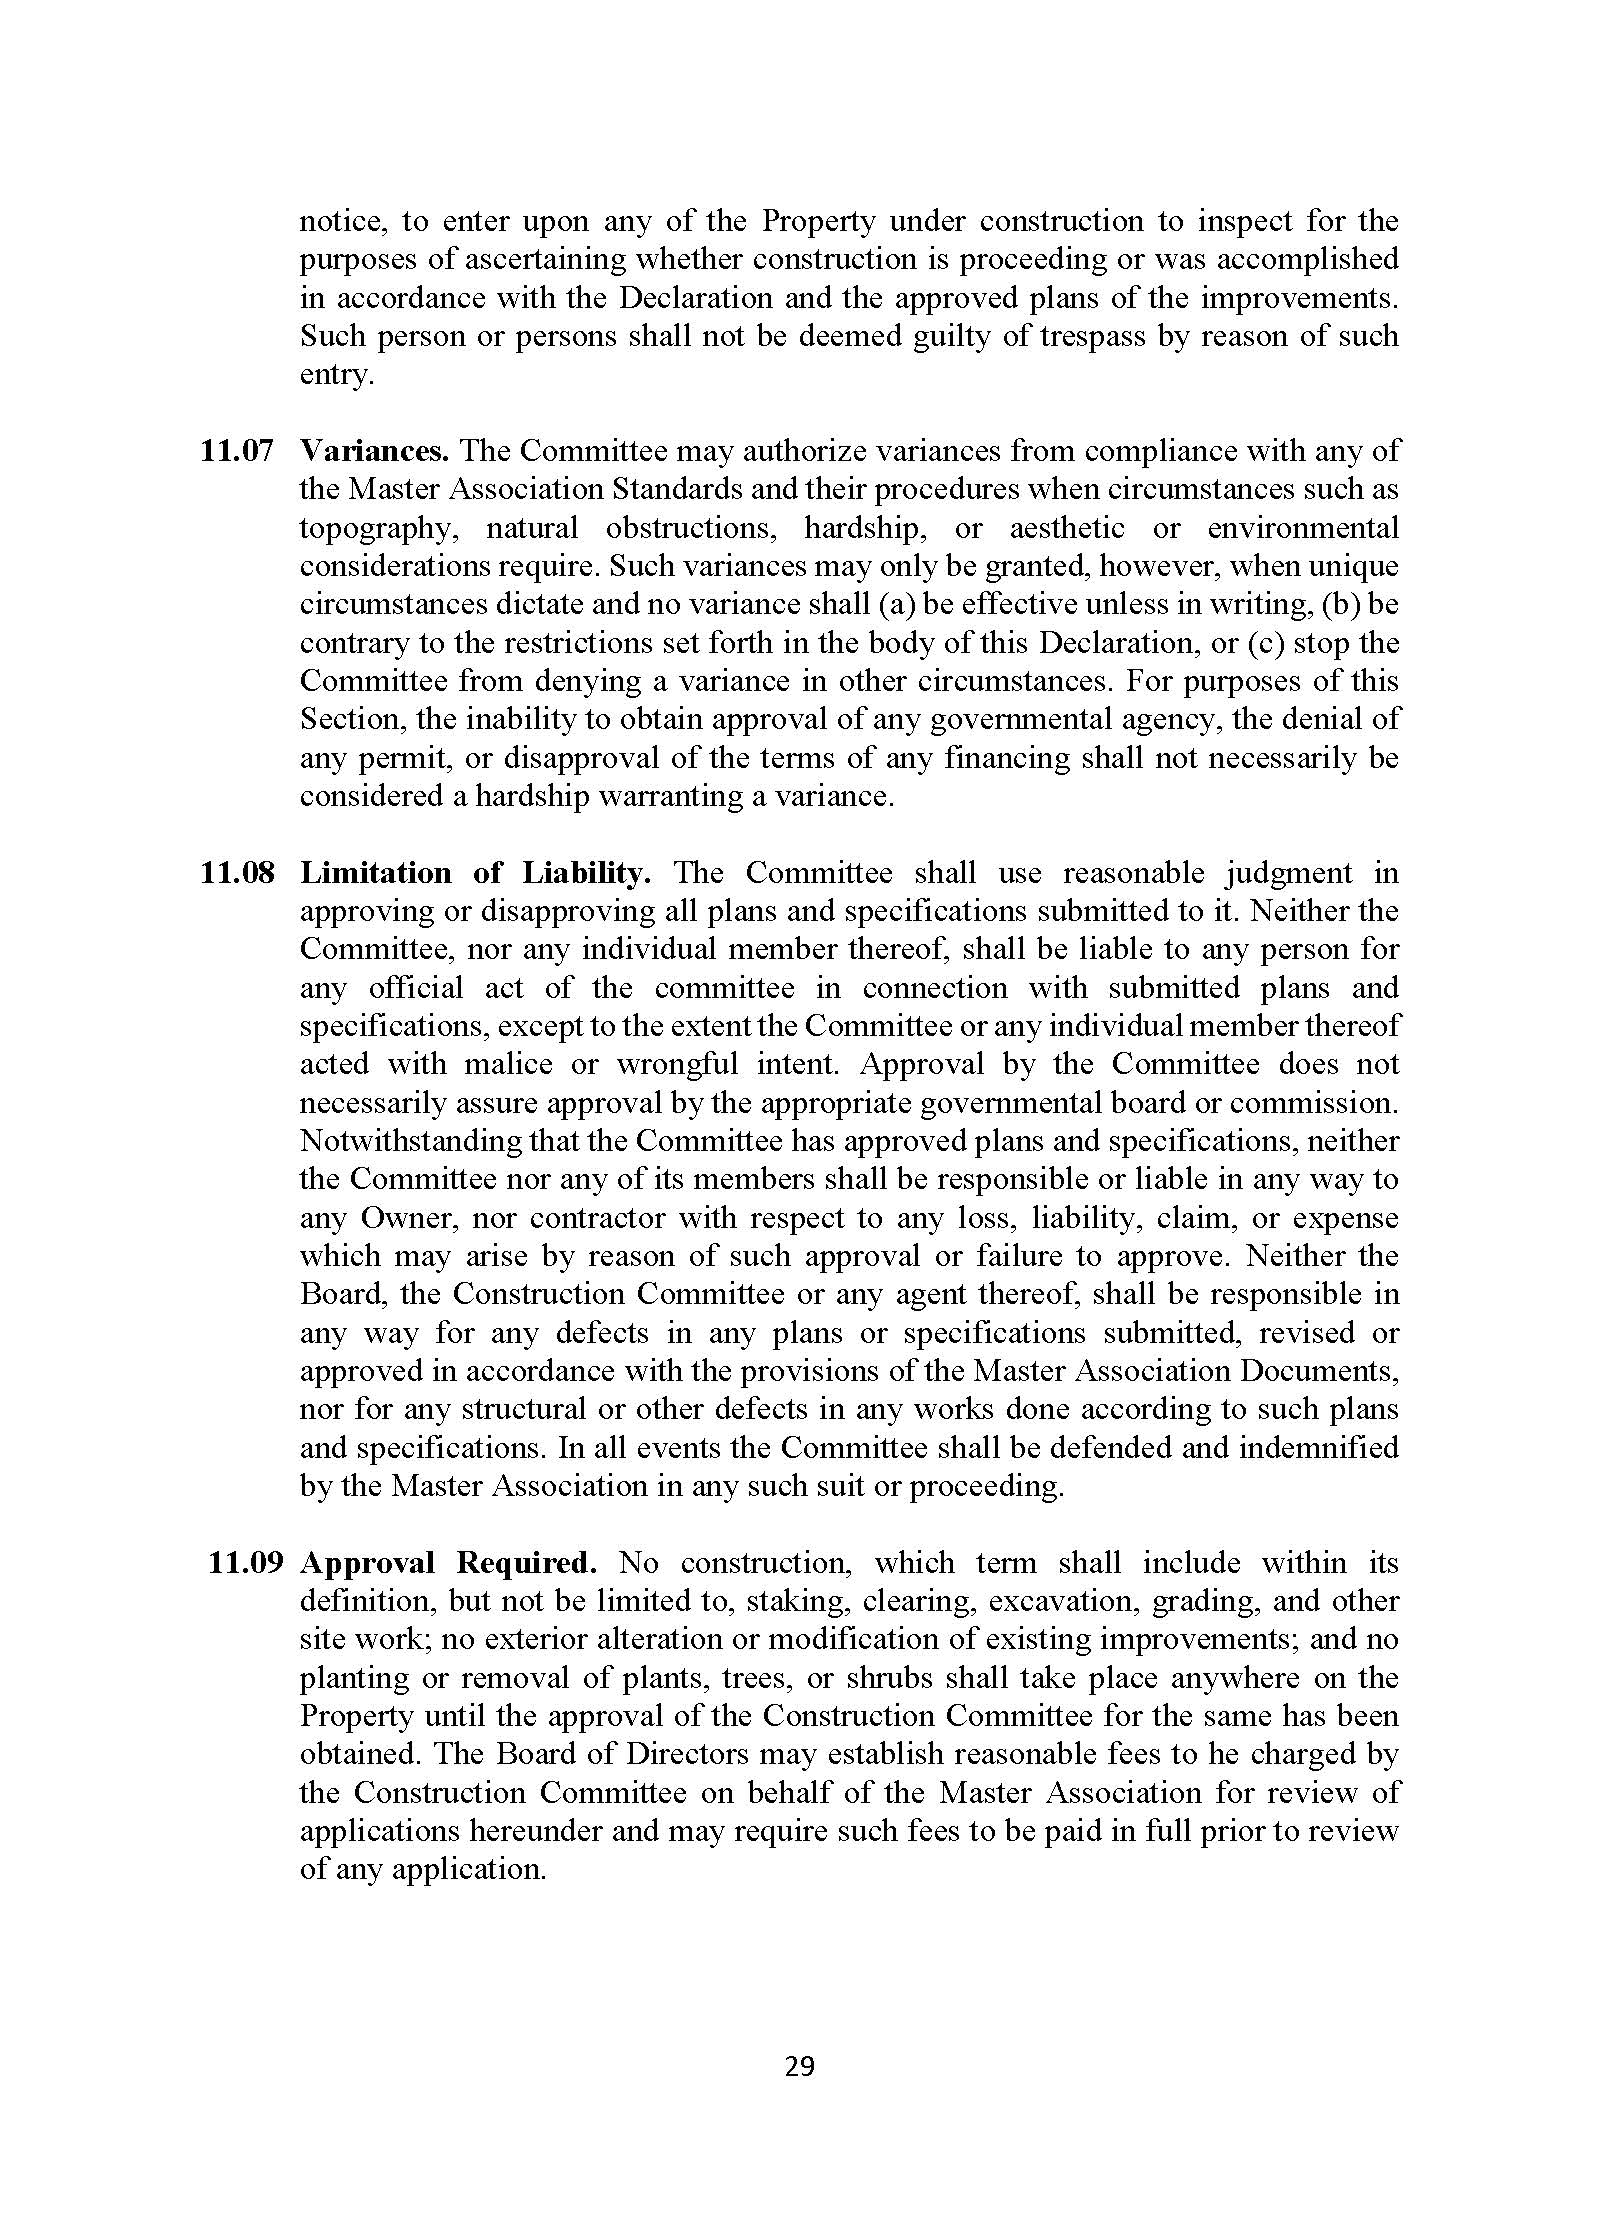 Article 11.X Page 29